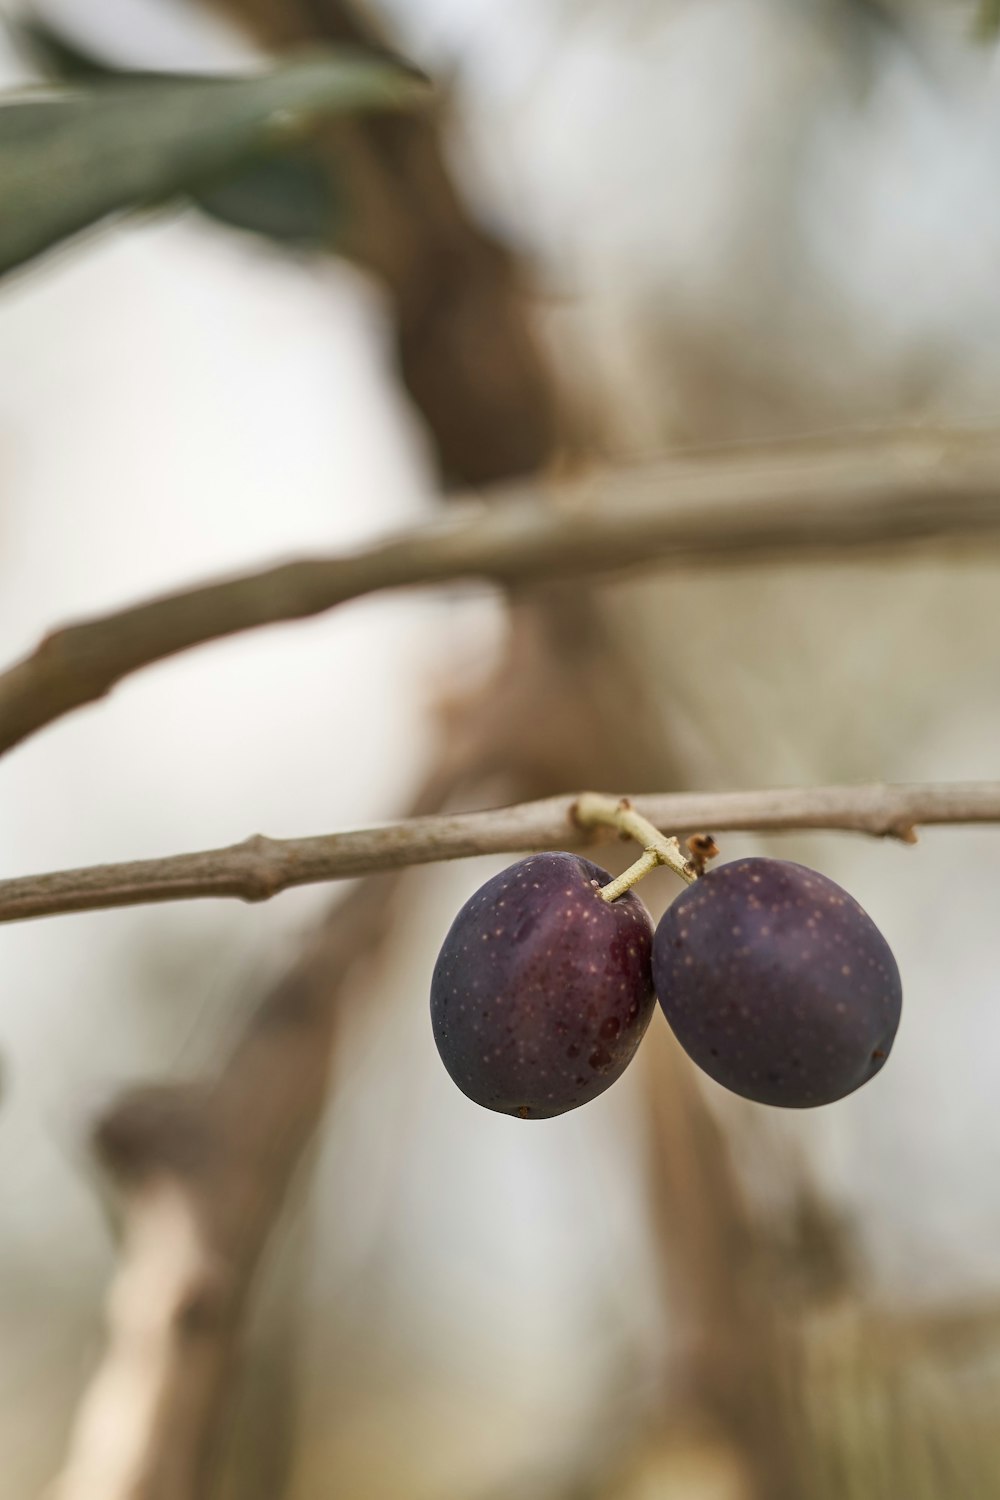 two plums hanging from a tree branch